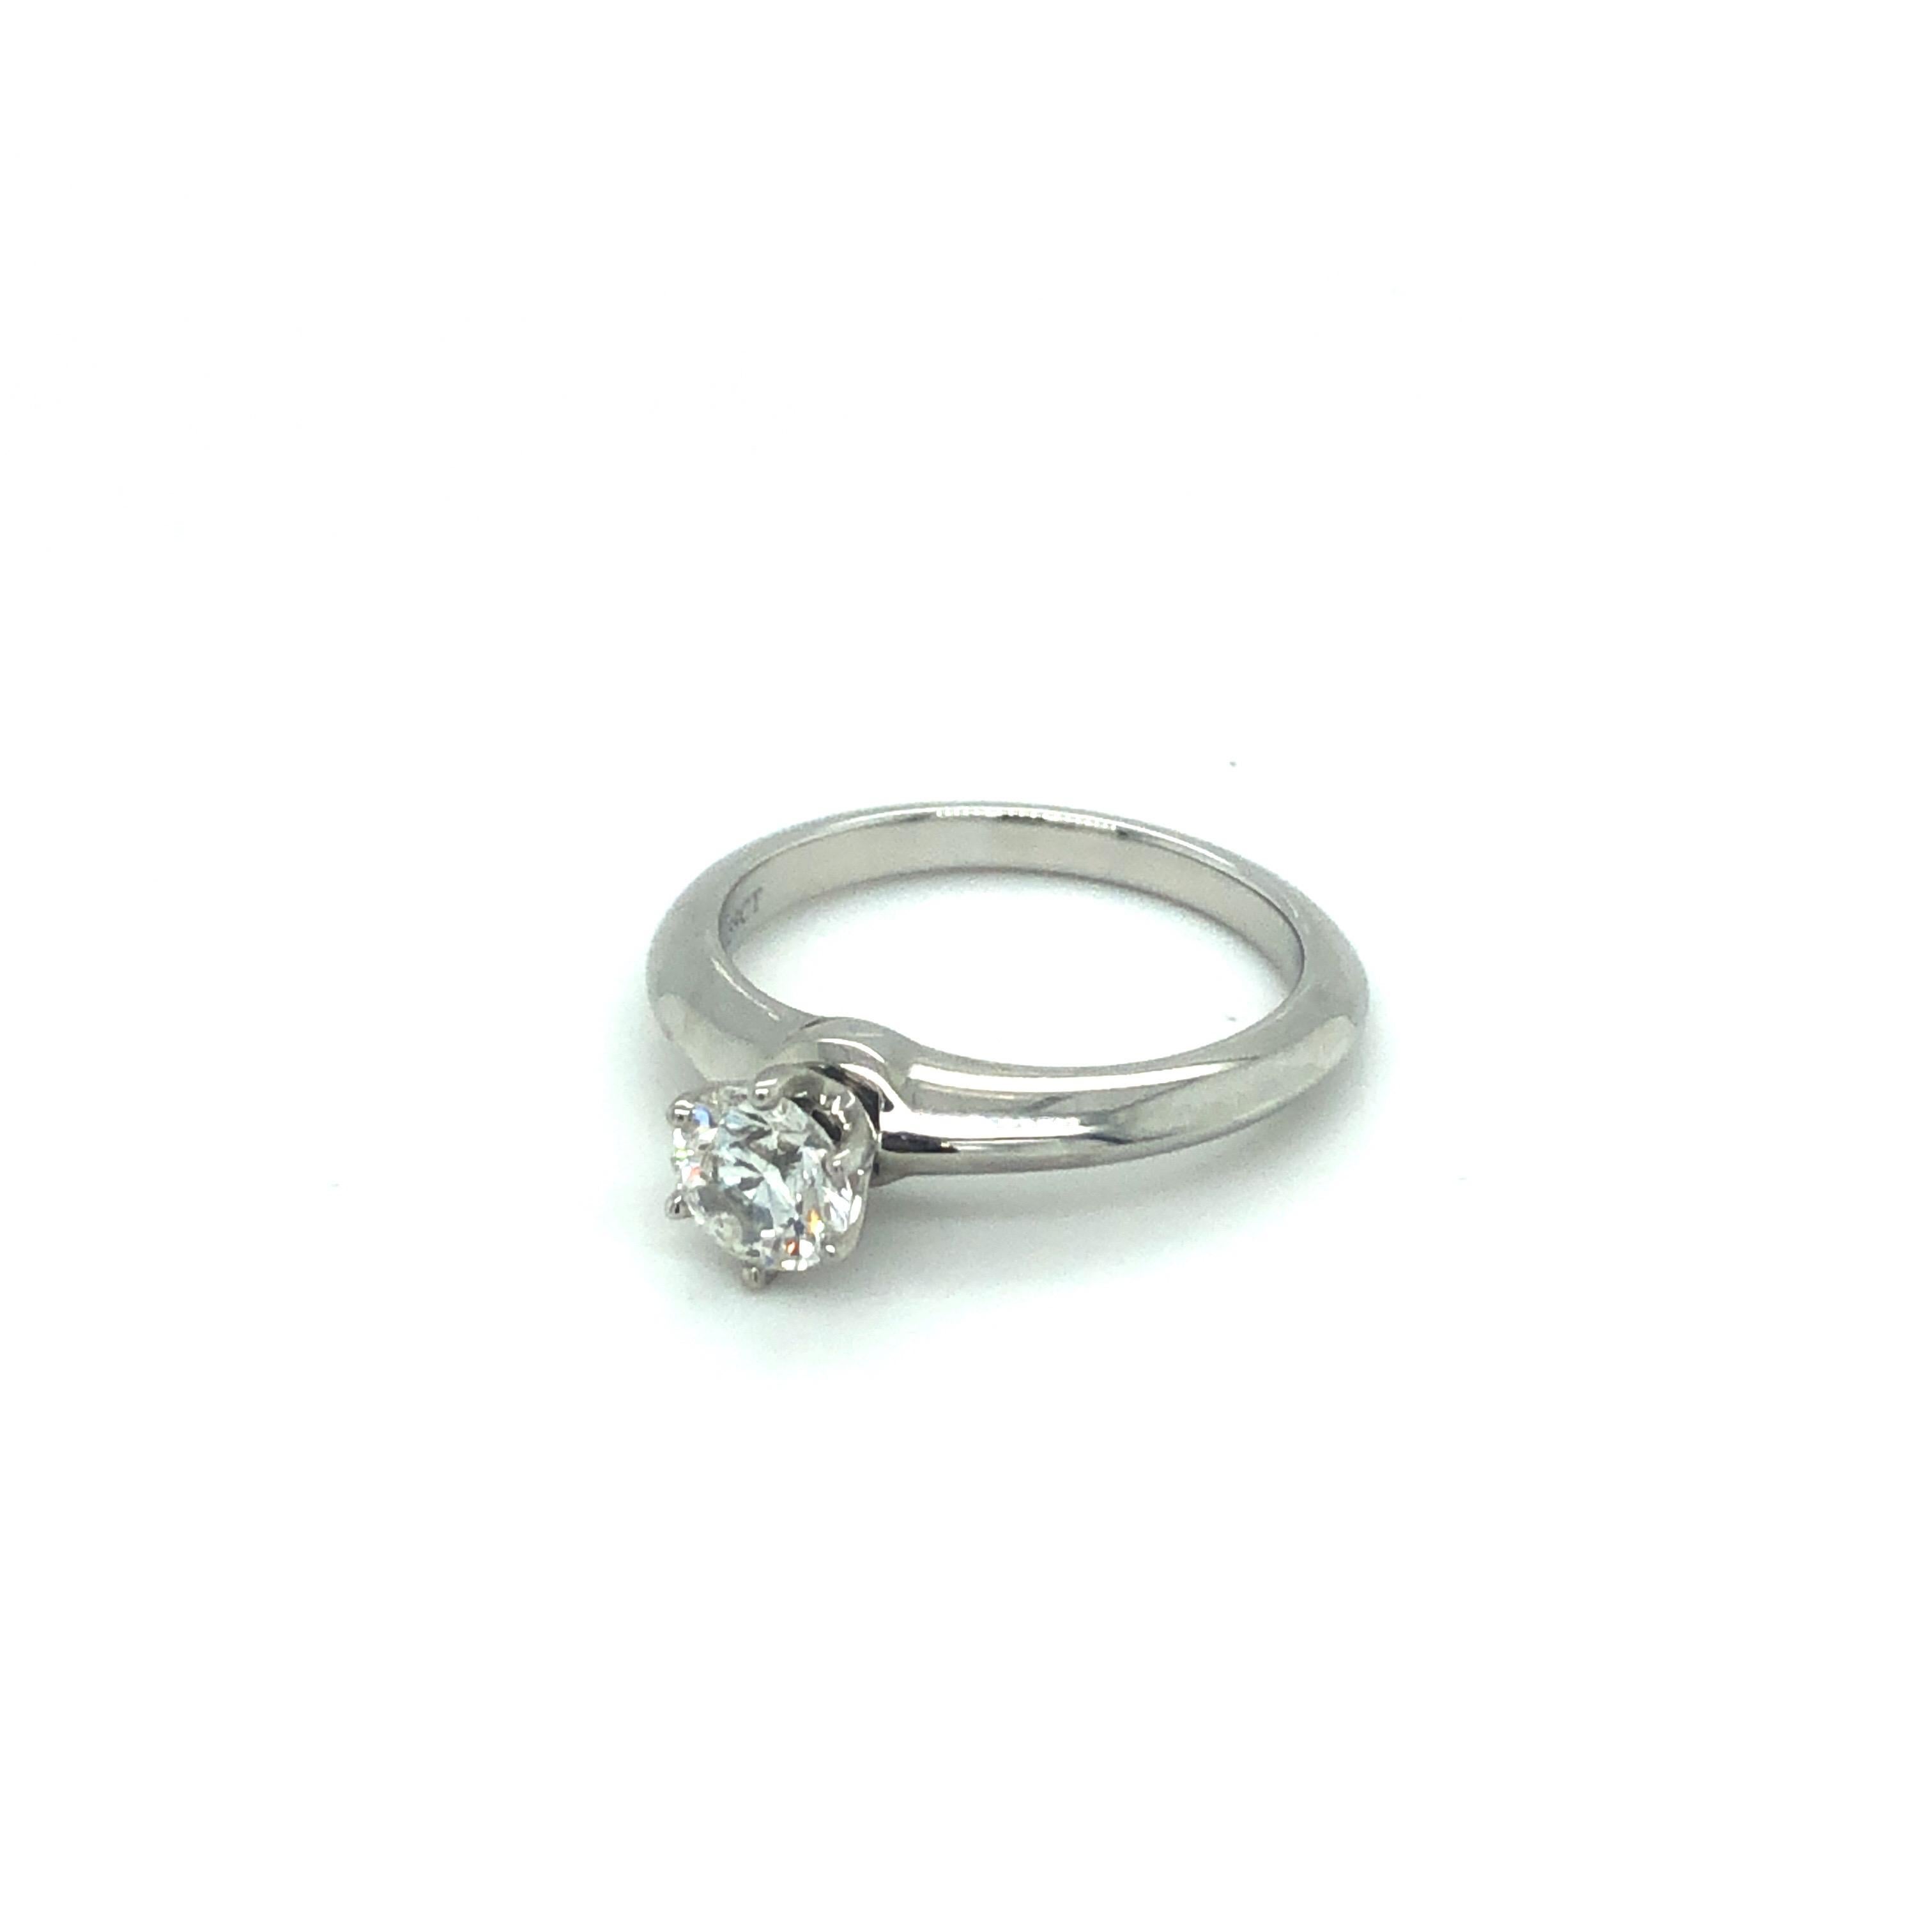 Tiffany & Co. 0.59 carats six prong round cut diamond and platinum engagement ring.
This graceful and feminine 0.59 carats engagement ring from the Setting collection of Tiffany & Co. is crafted in platinum and features an high quality brilliant-cut